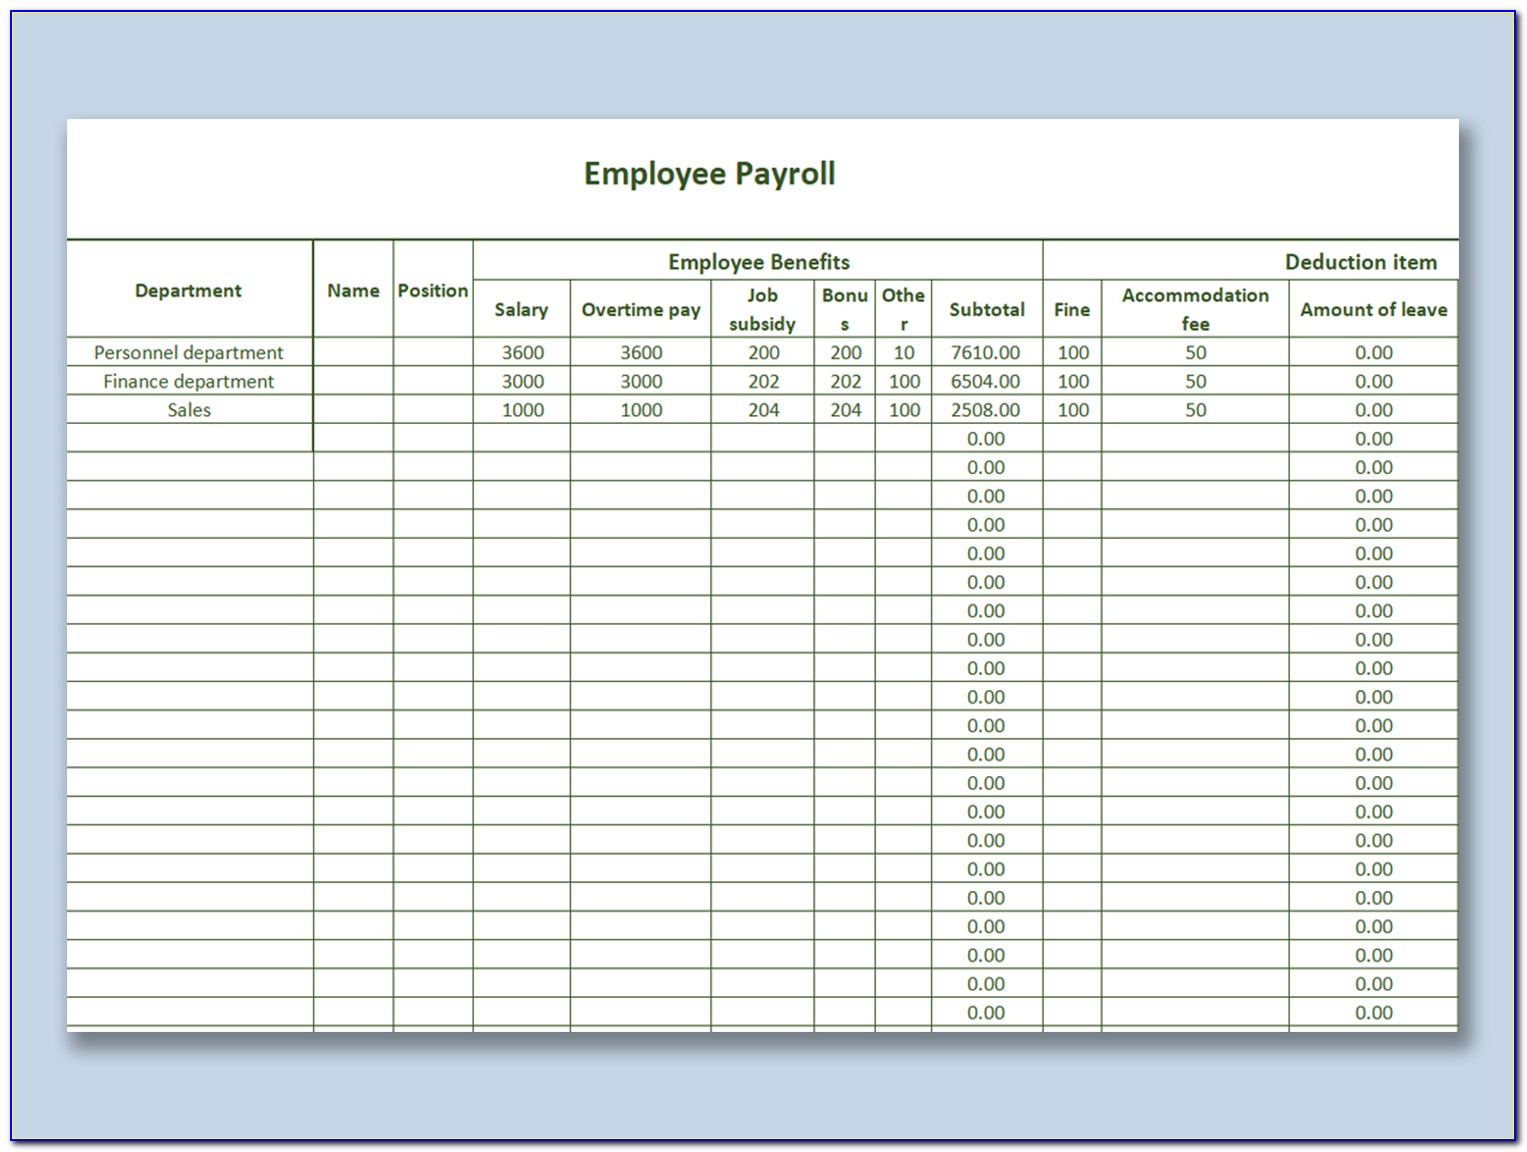 Employee Payroll Record Template